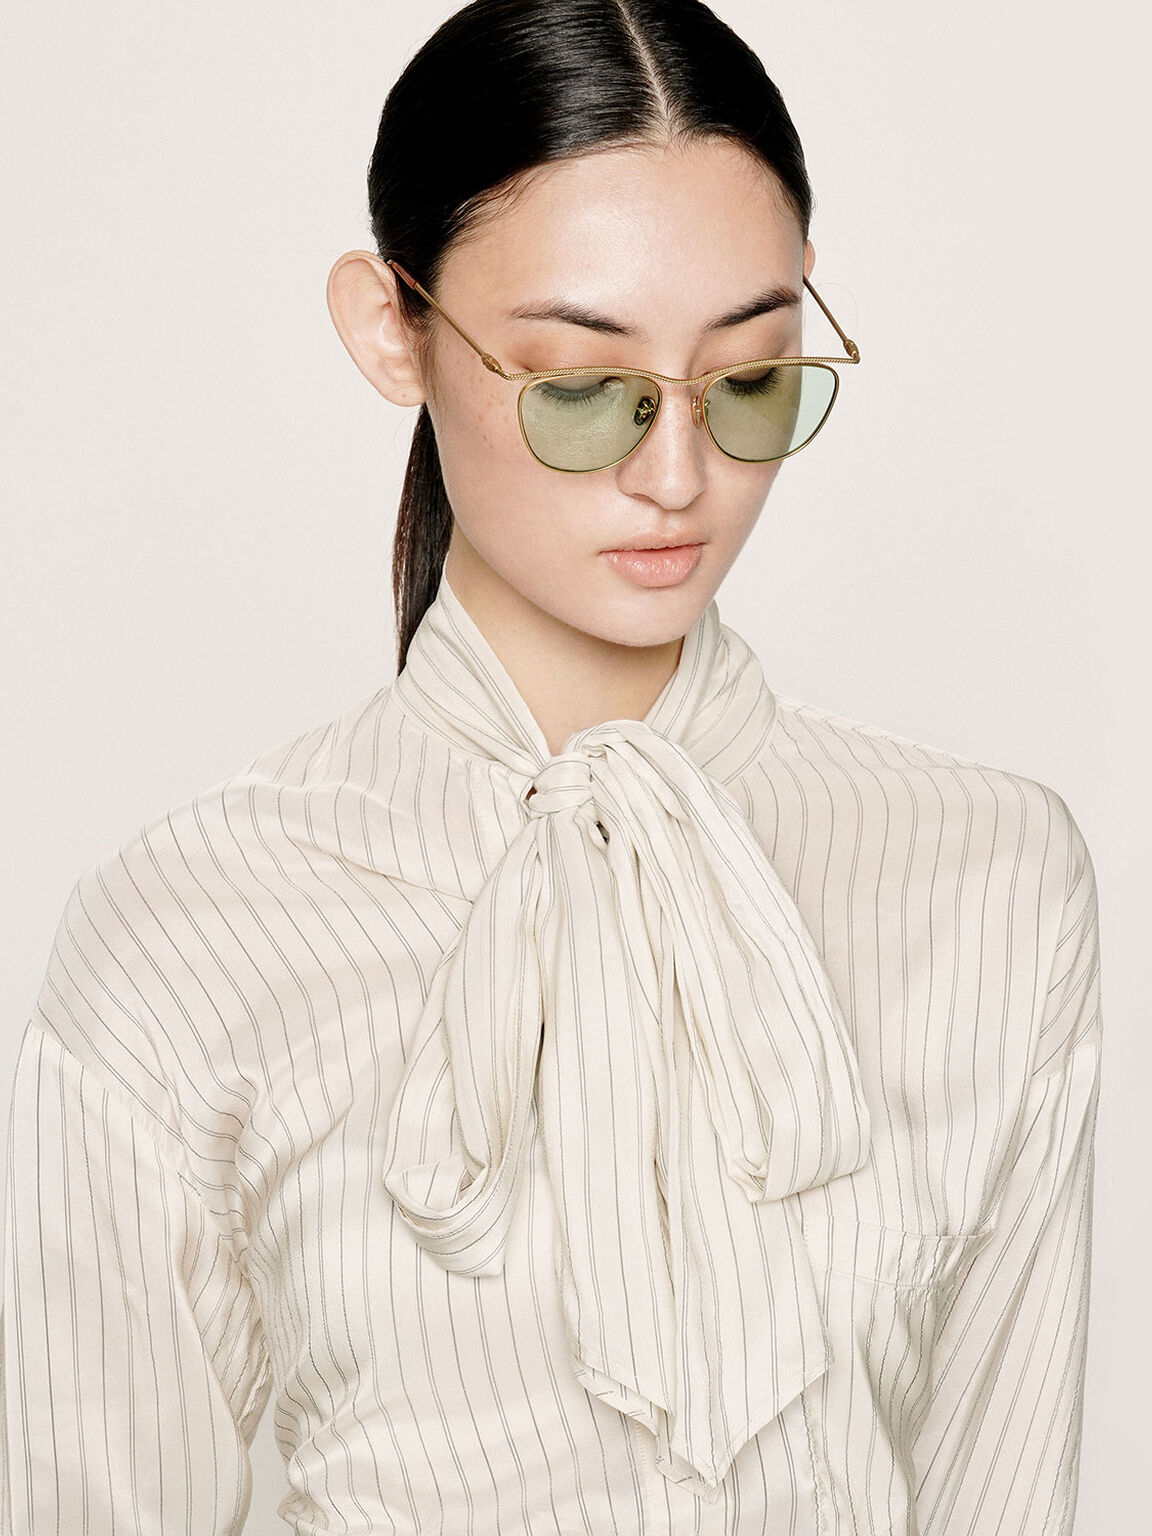 Green Wireframe-Tinted-Sunglasses - CHARLES & KEITH International